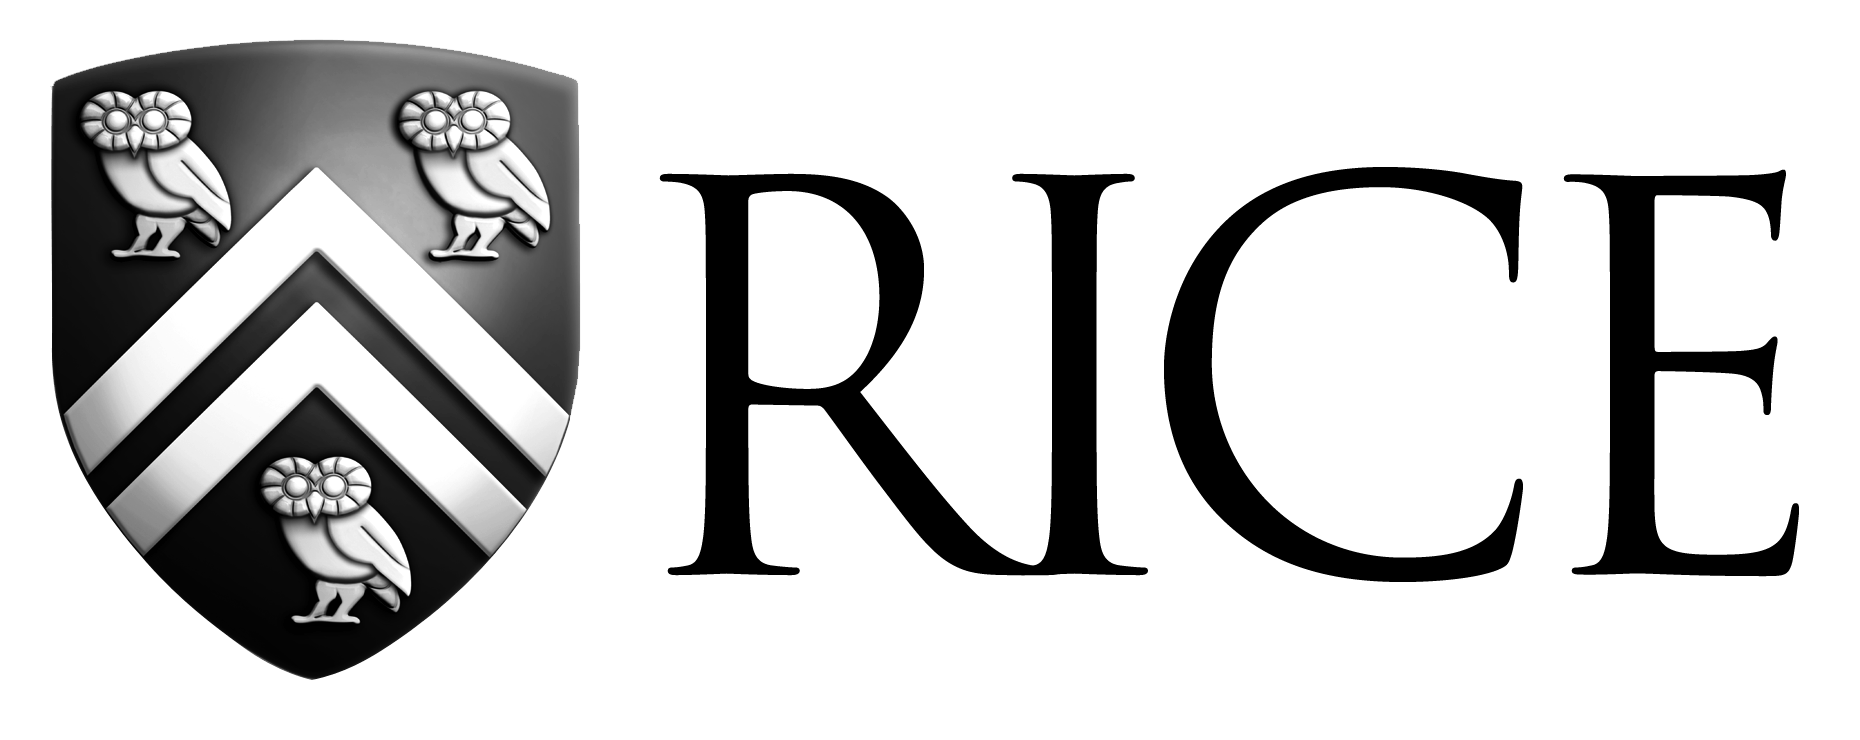 White Rice Logo - Downloads and Tools : Rice University